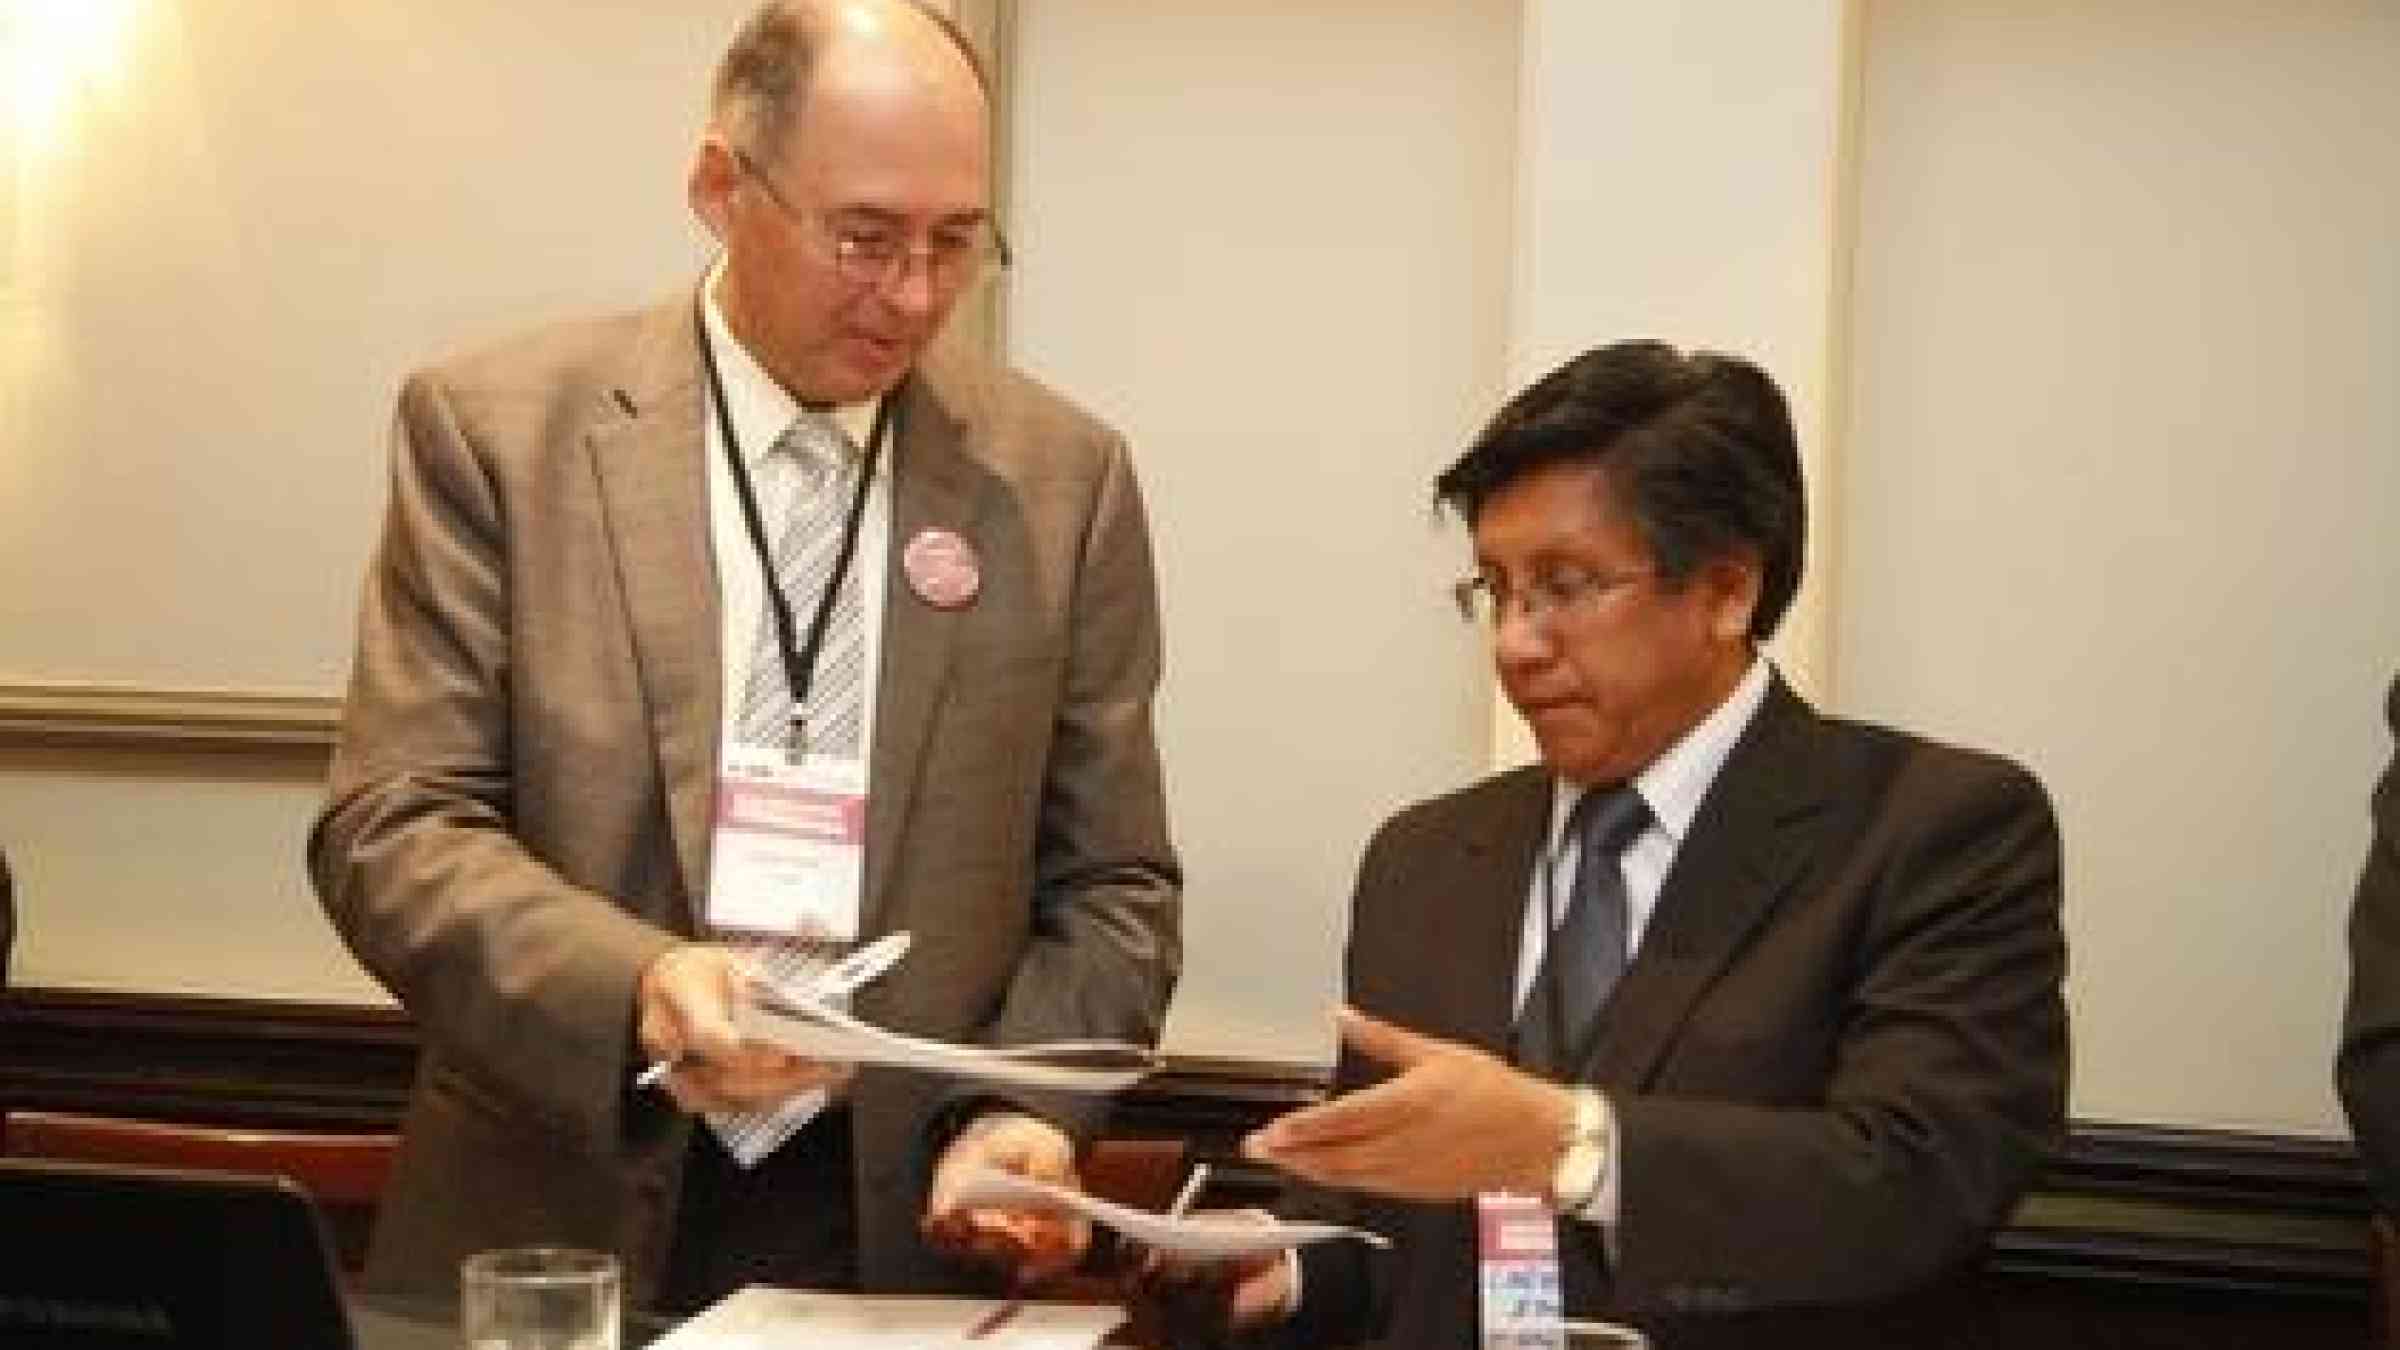 From left: Ricardo Mena, Head of UNISDR's Regional Office in the Americas, and Educardo Cahuaricra, manager of the Association of Municipalities of Peru (AMPE).